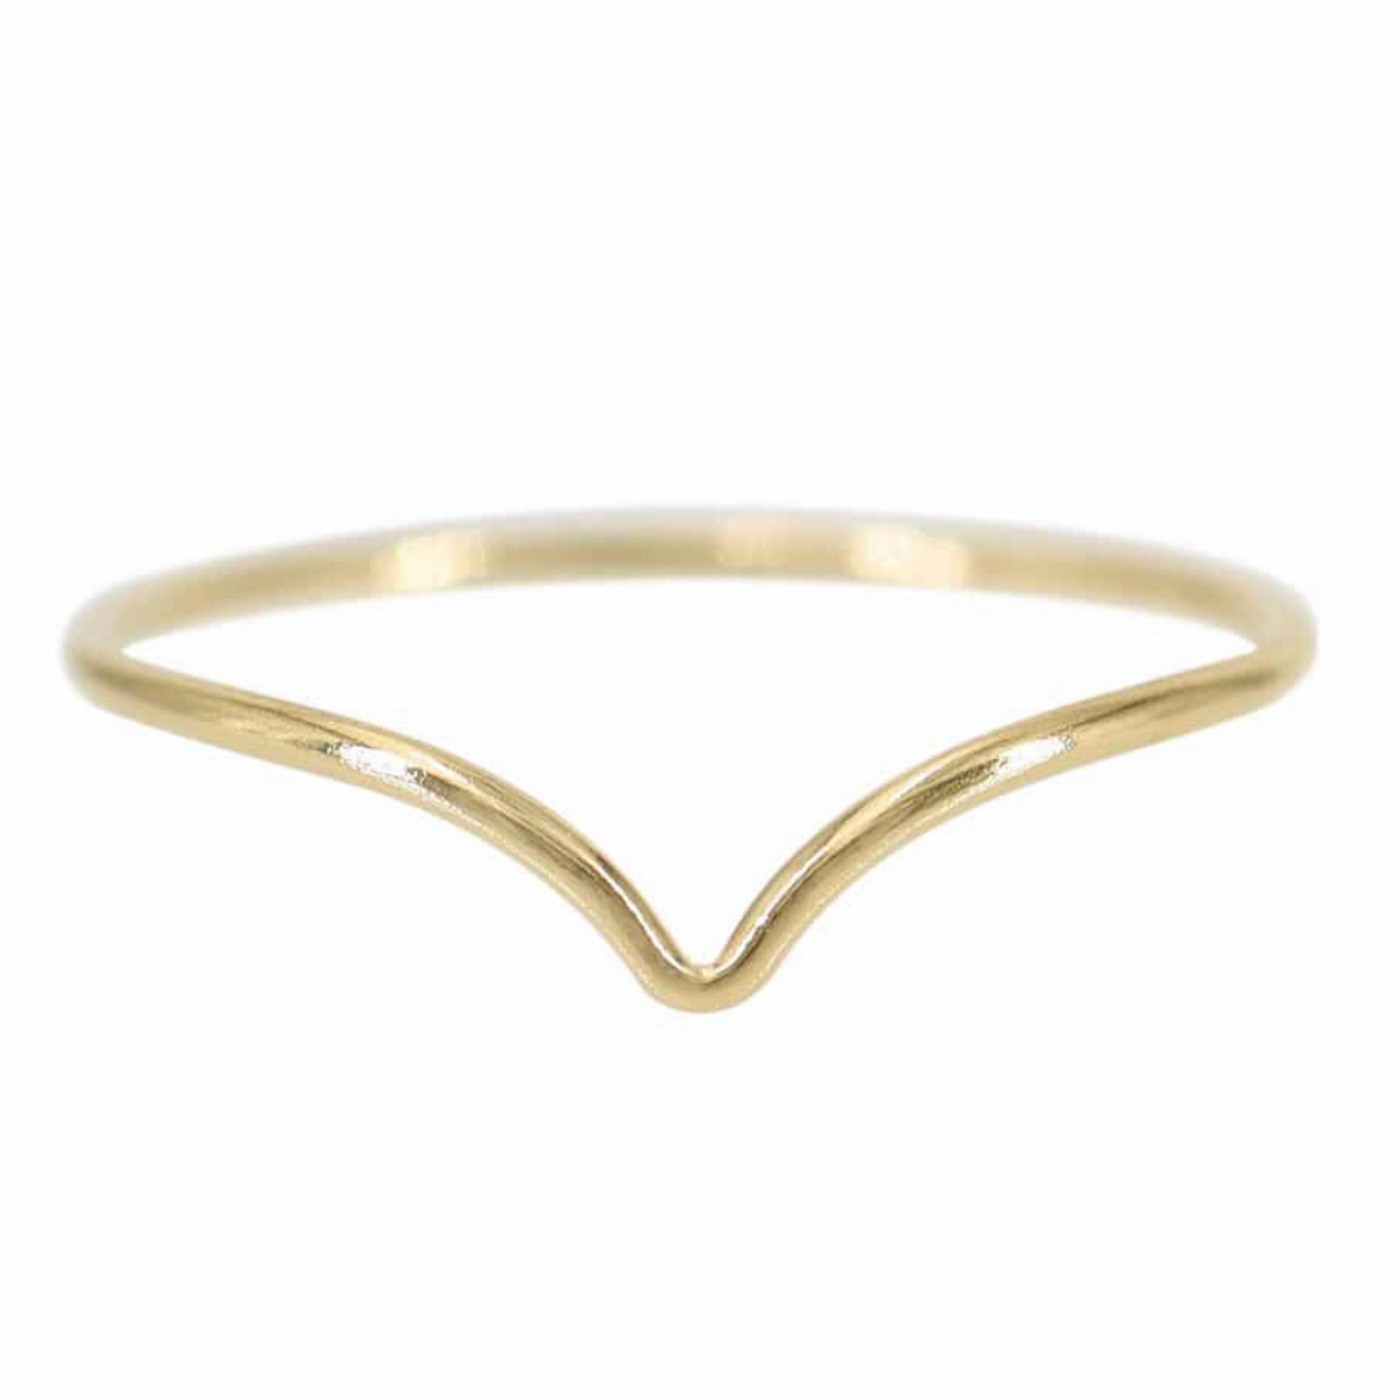 14K gold filled chevron shaped minimalist stacking ring with white background